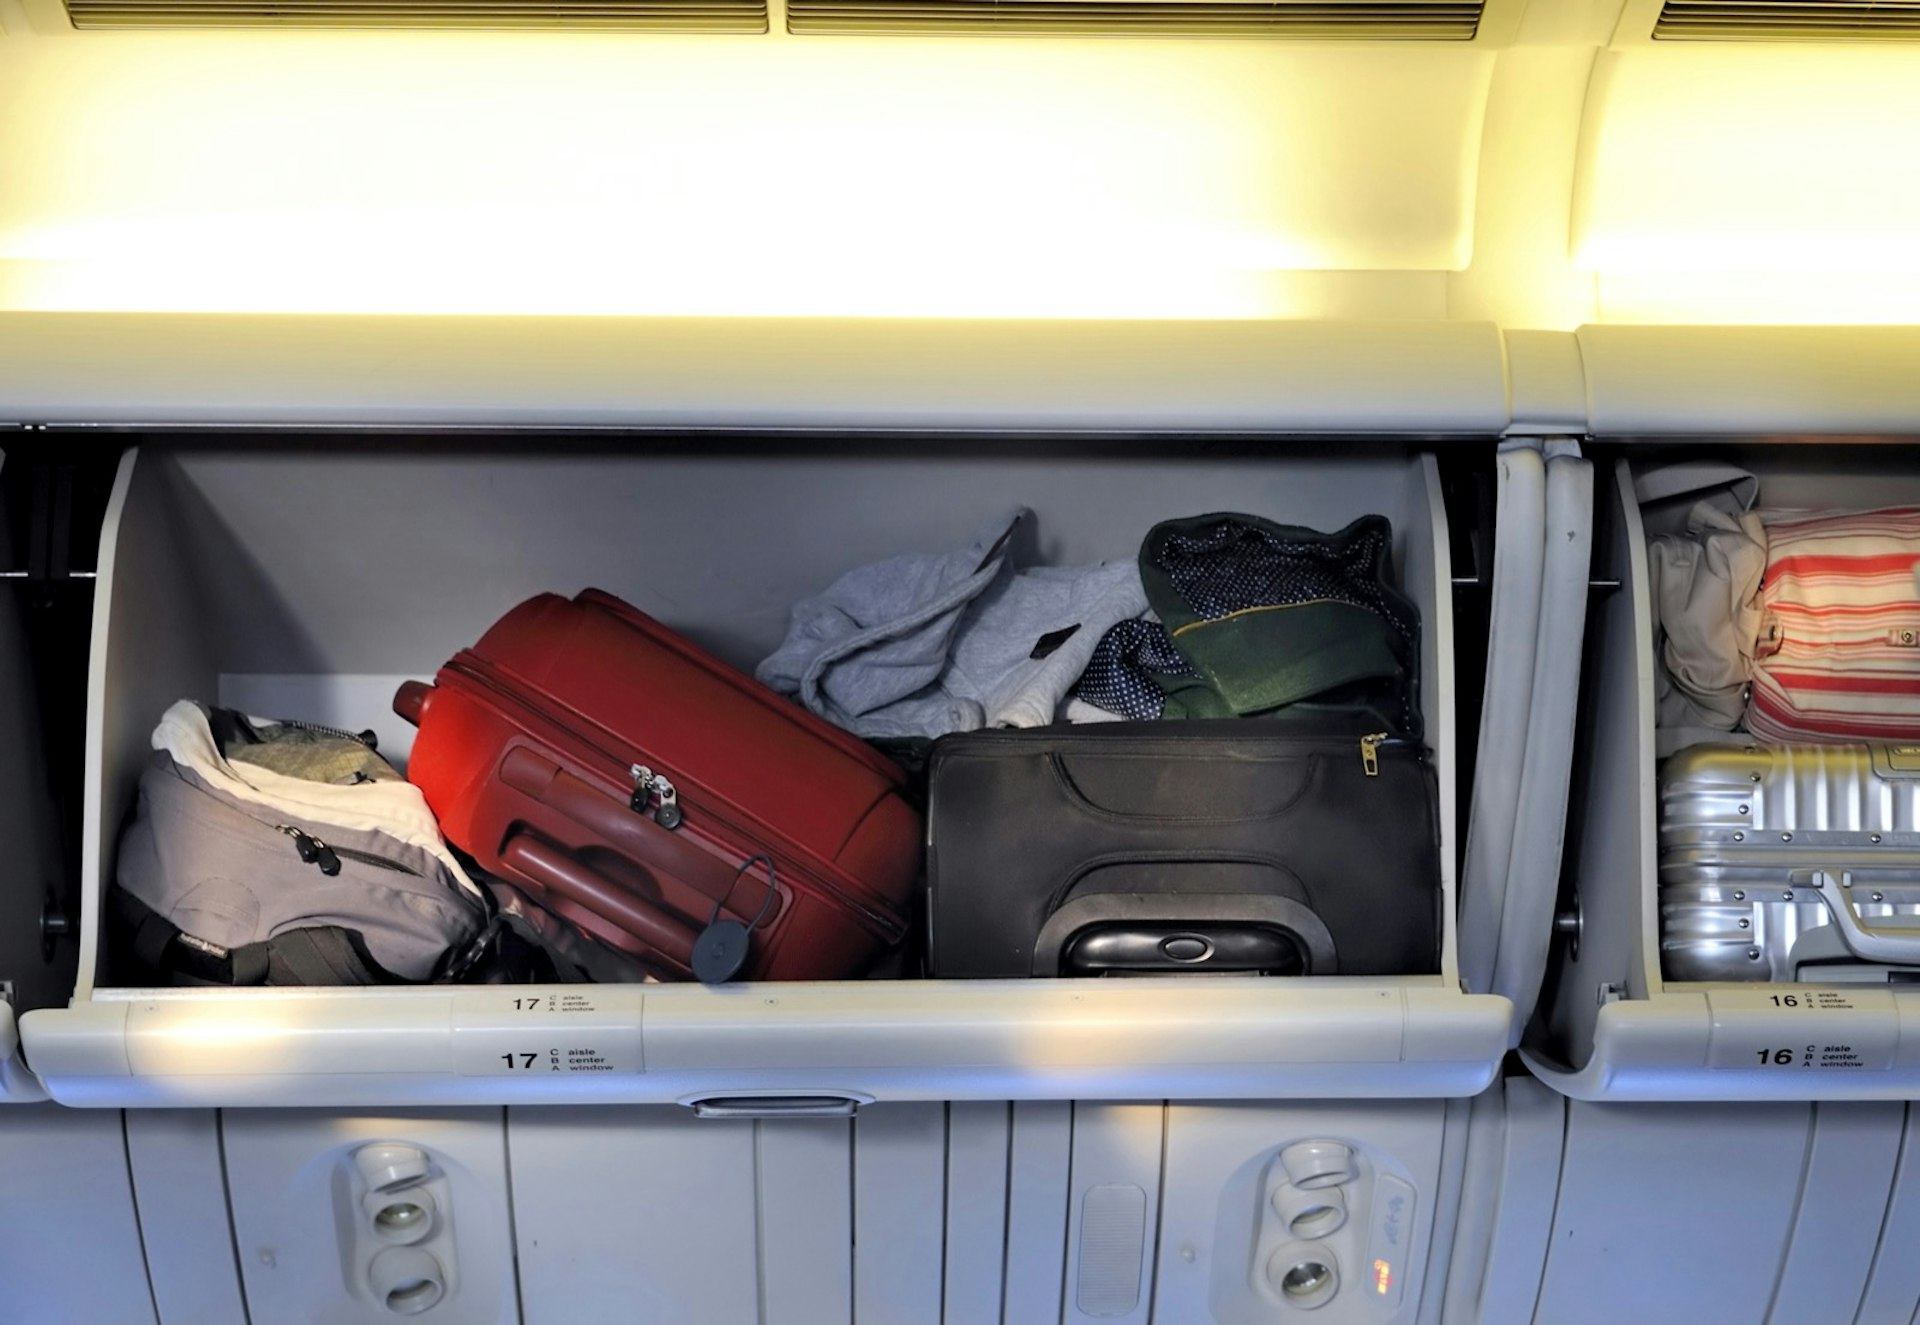 Carry-on luggage in overhead storage compartment on commercial airplane; The dos and don'ts of flying etiquette